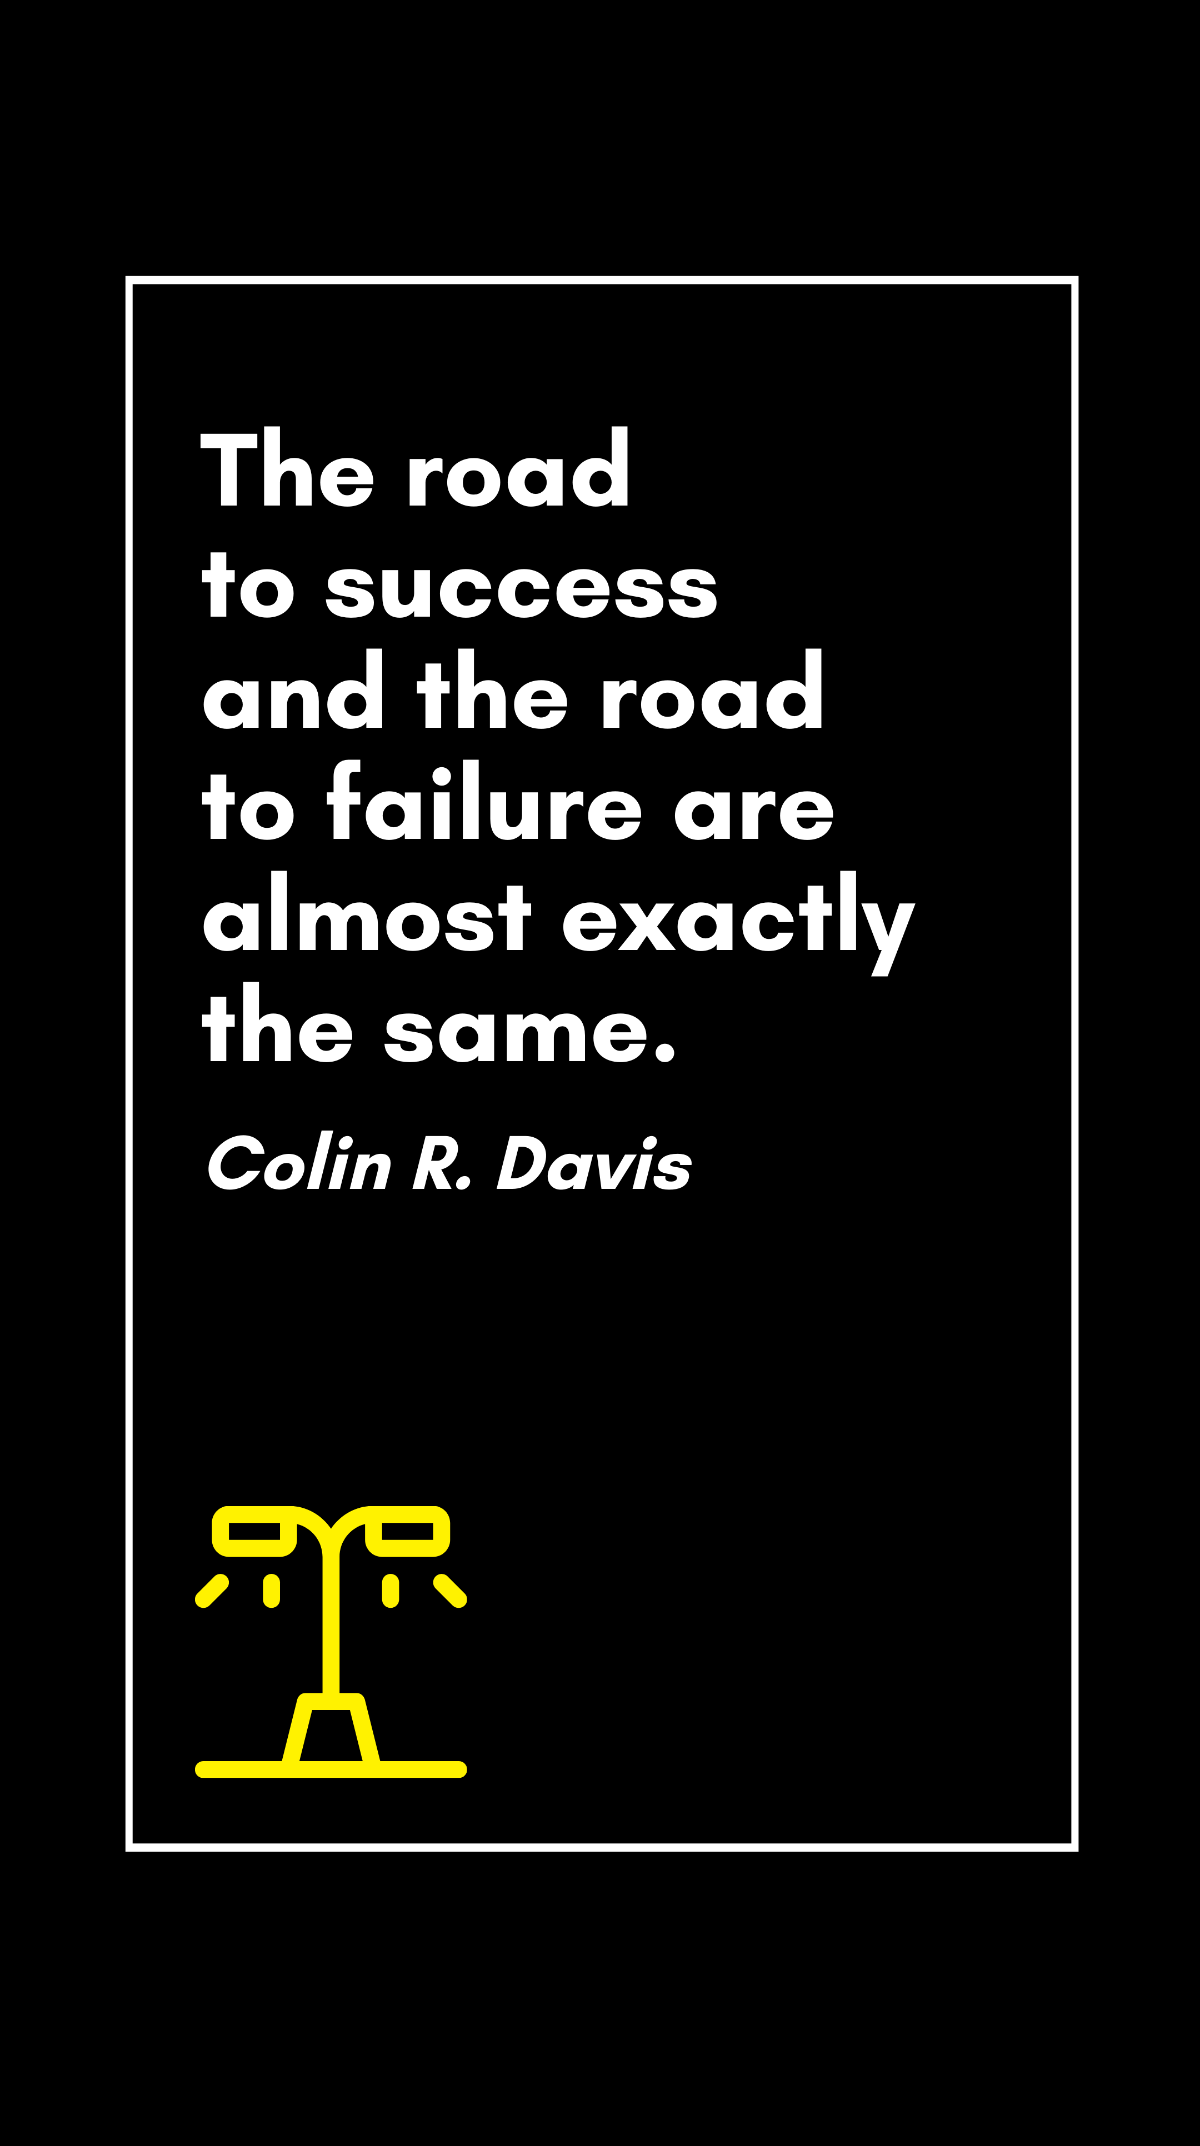 Free Colin R. Davis - The road to success and the road to failure are almost exactly the same. Template